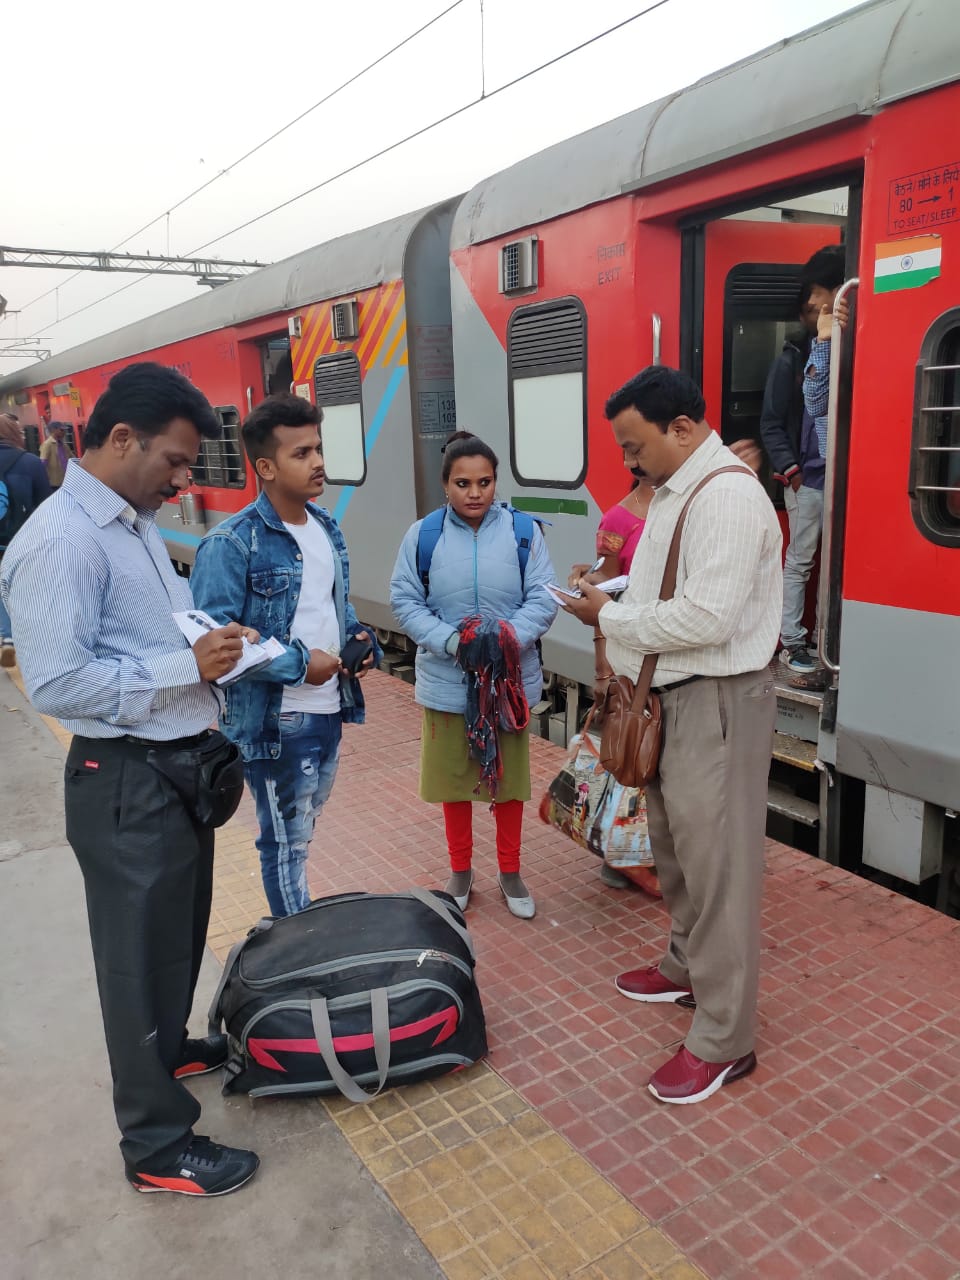 Railways takes action against passengers traveling without tickets